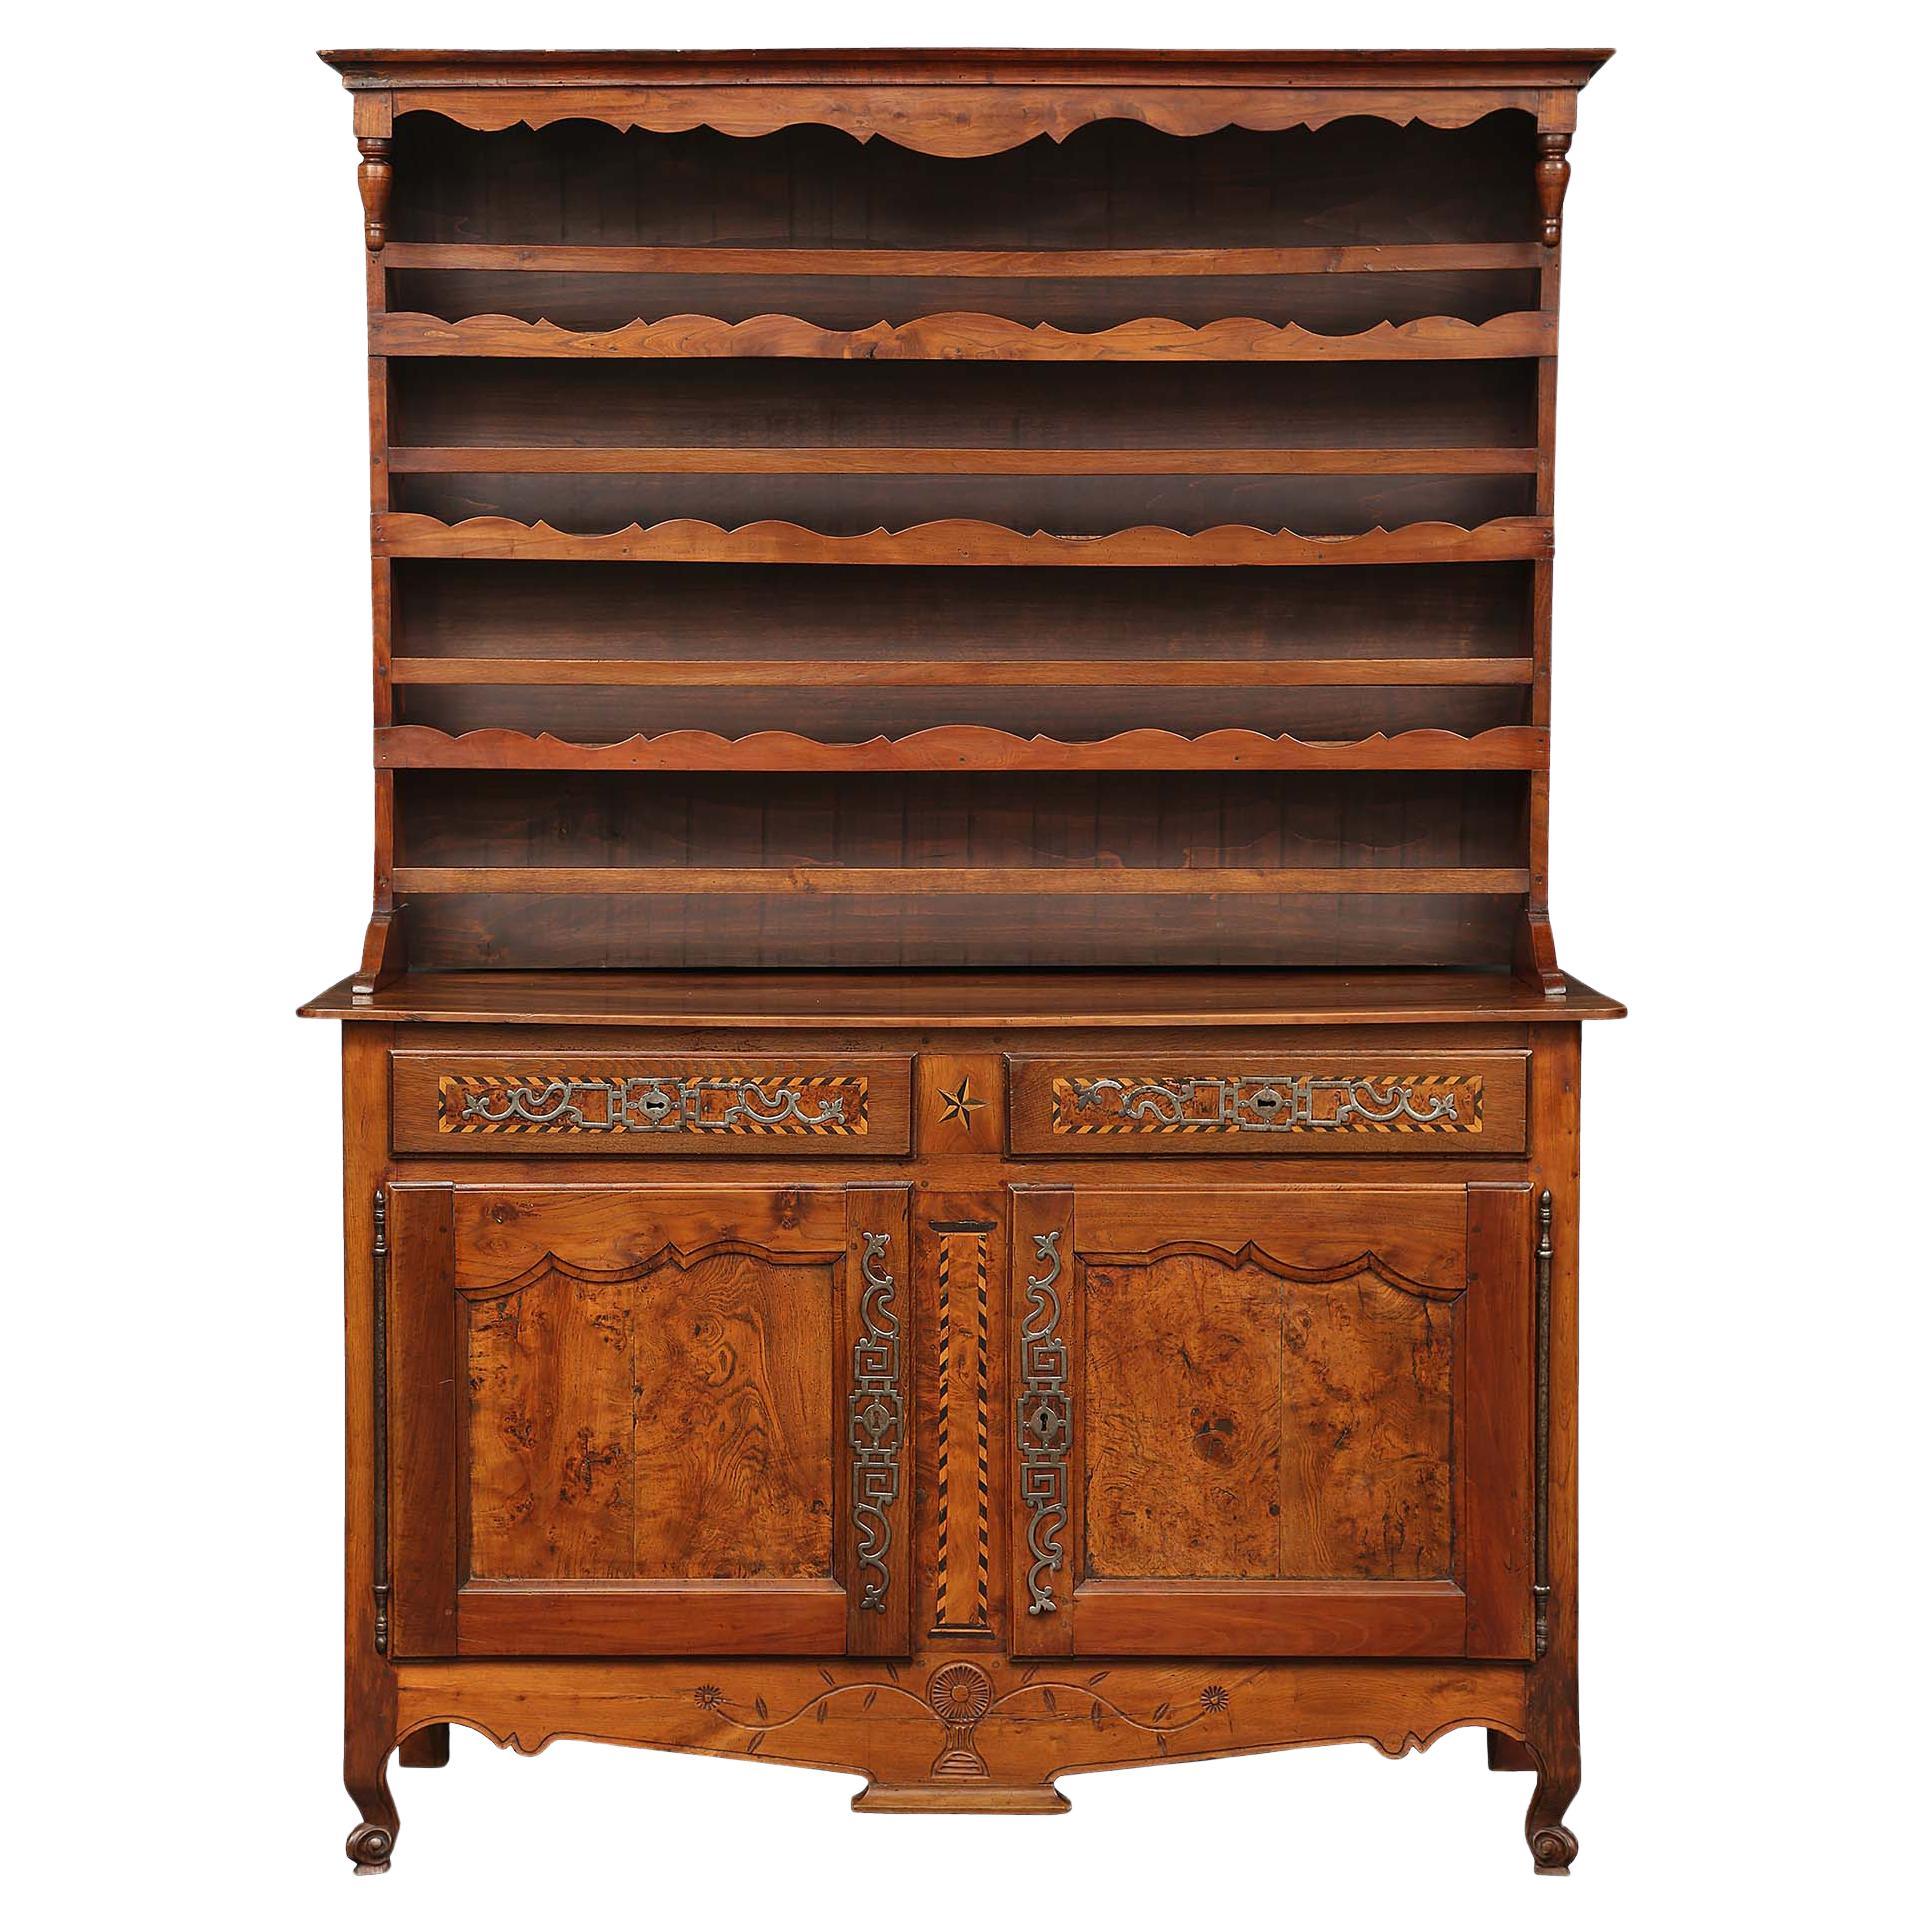 French 18th Century ‘Vaissellier’ in Walnut, Lemon Wood and Burl Walnut For Sale